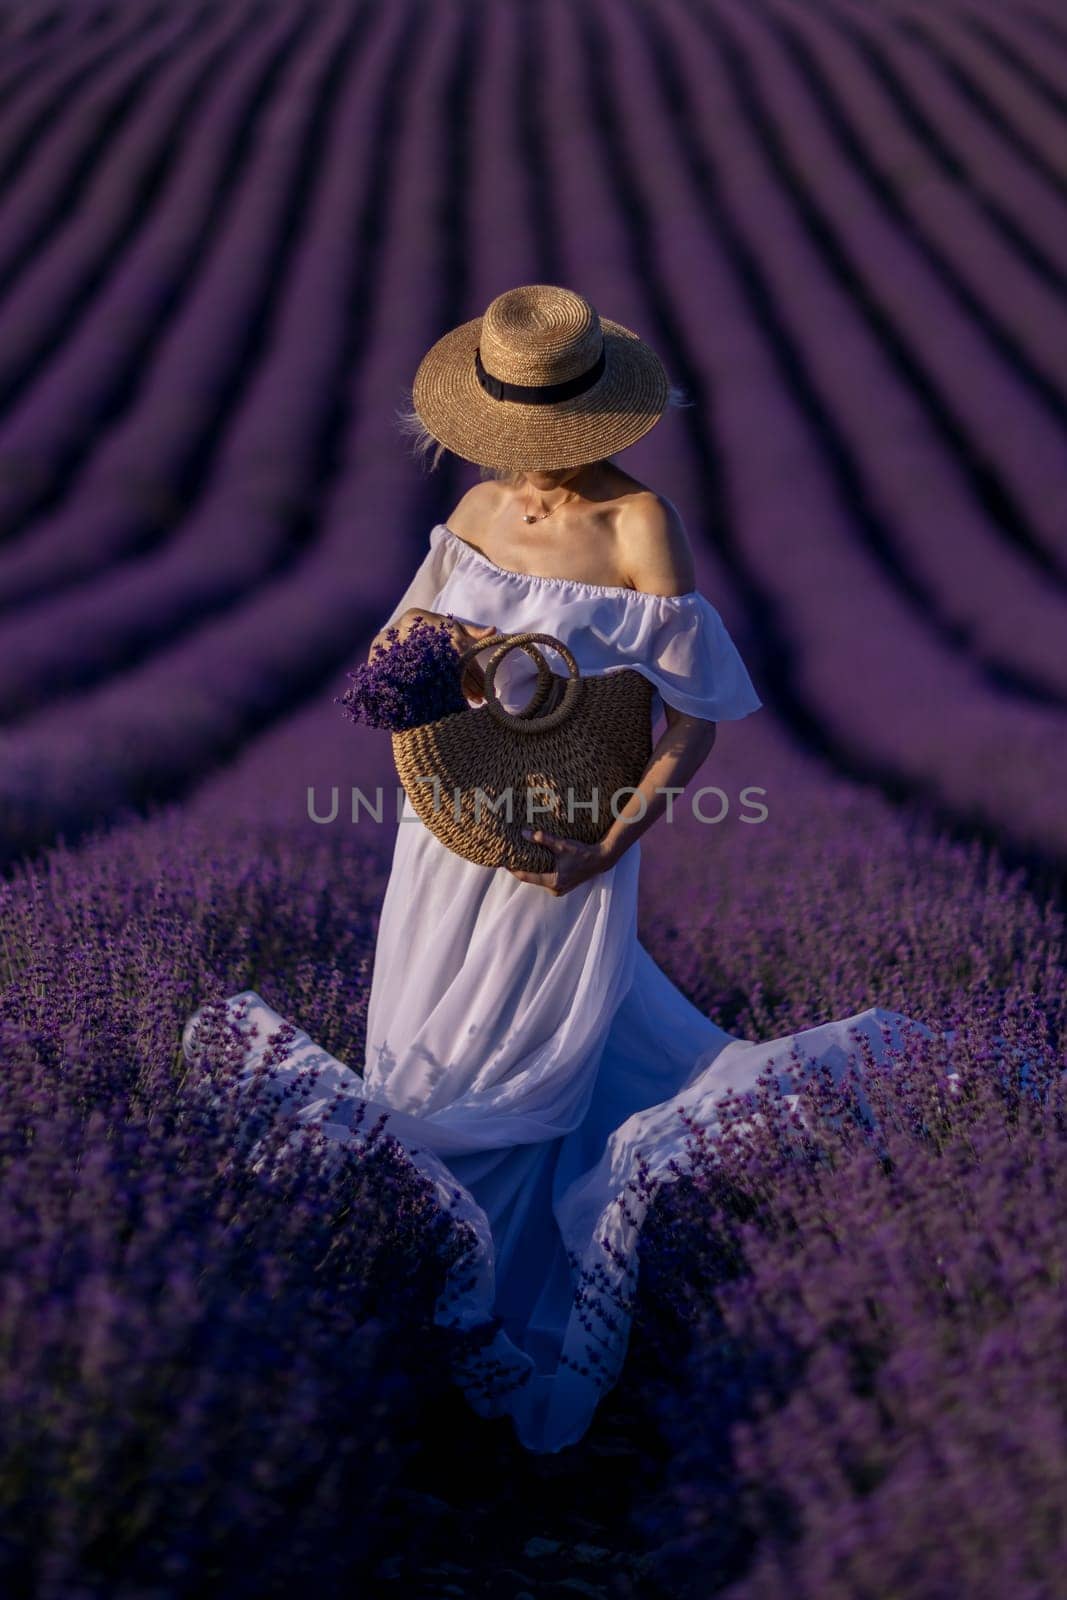 A woman is standing in a field of purple lavender flowers, wearing a straw hat and holding a basket of flowers